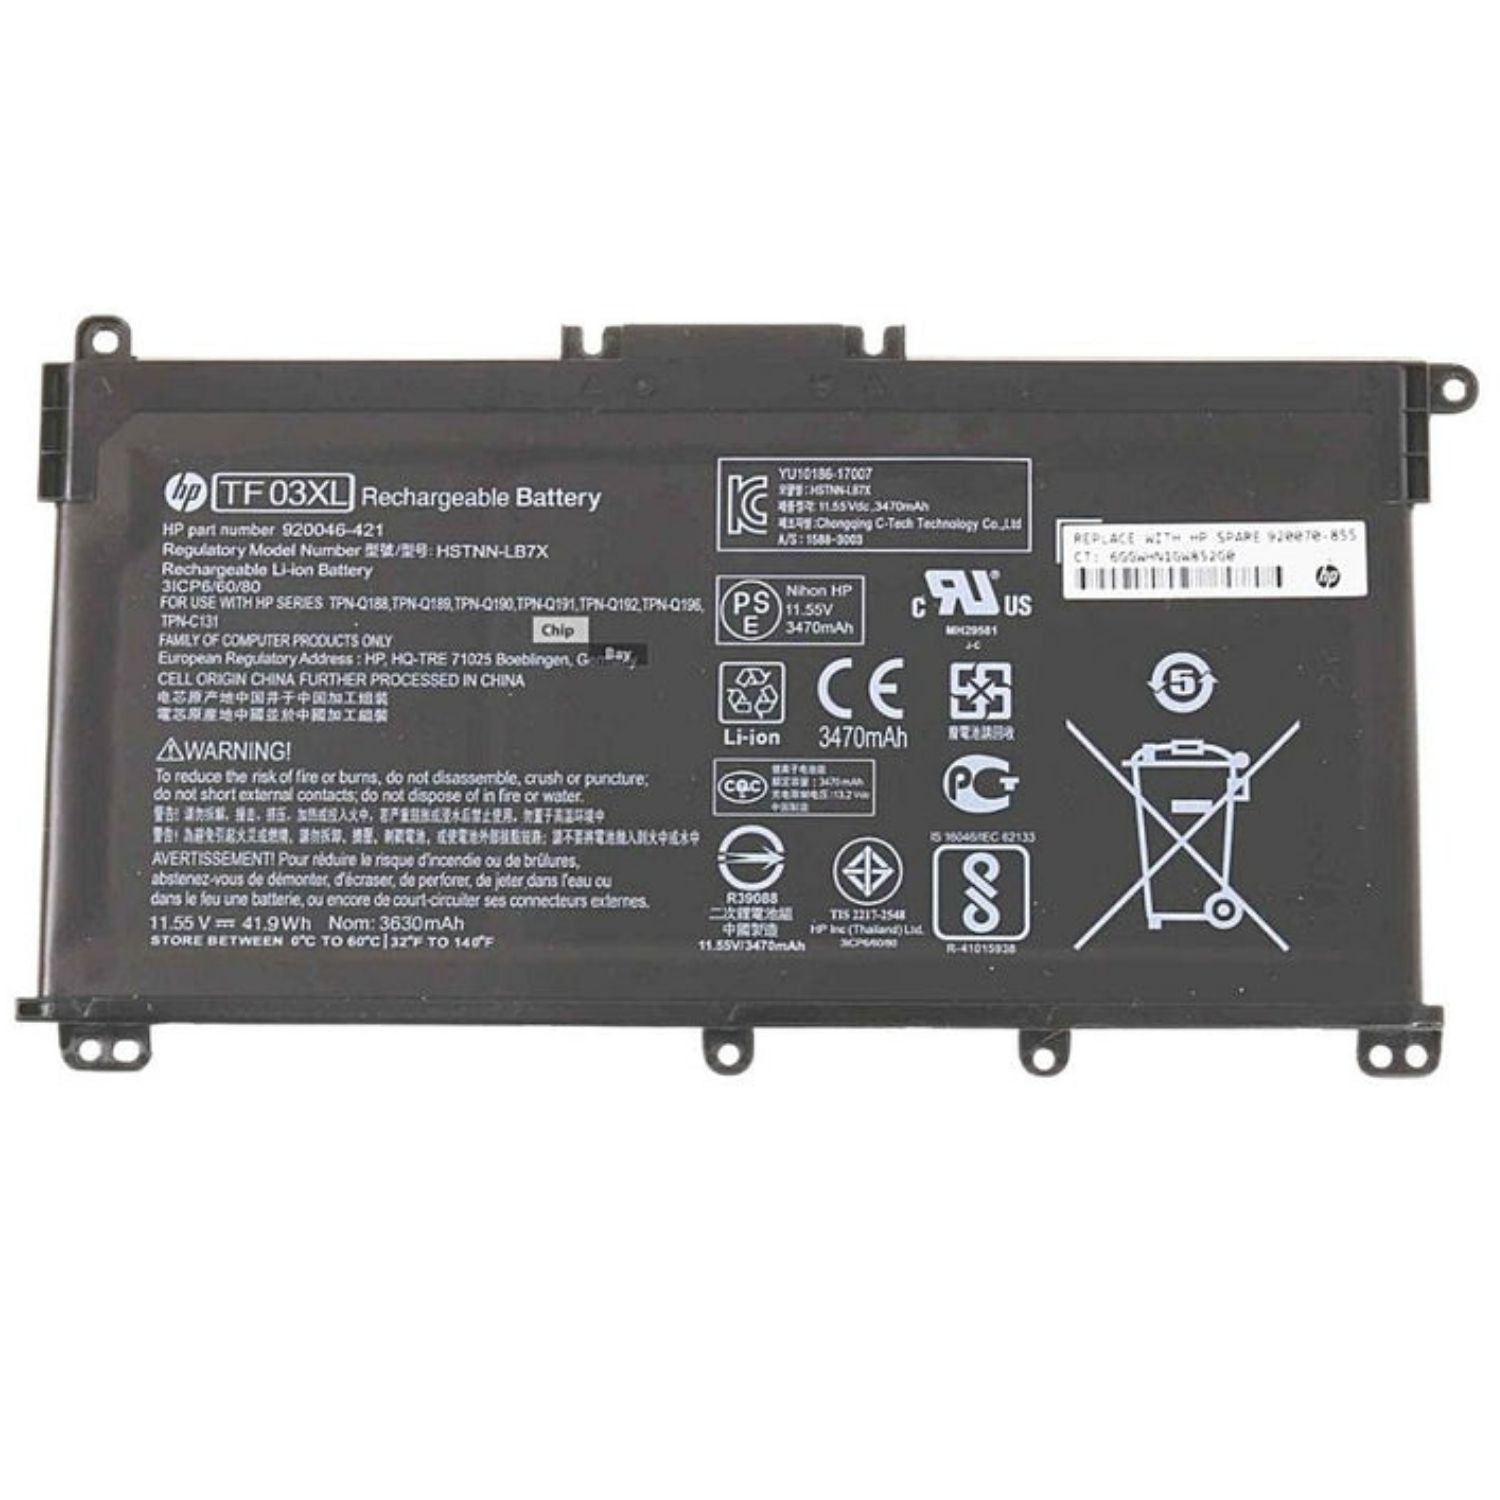 Hp HT03XL Compatible Battery For HP Pavilion X360 14-CE 14-CF 14-CK 14-cm 14Q-CS 14Q-CY 14S-CF 14S-CR 15-CS 15-DA 15-DB 15-DW 15G-DR 17-by 17-CA 240 245 246 250 255 340 348 G7 Series Laptops